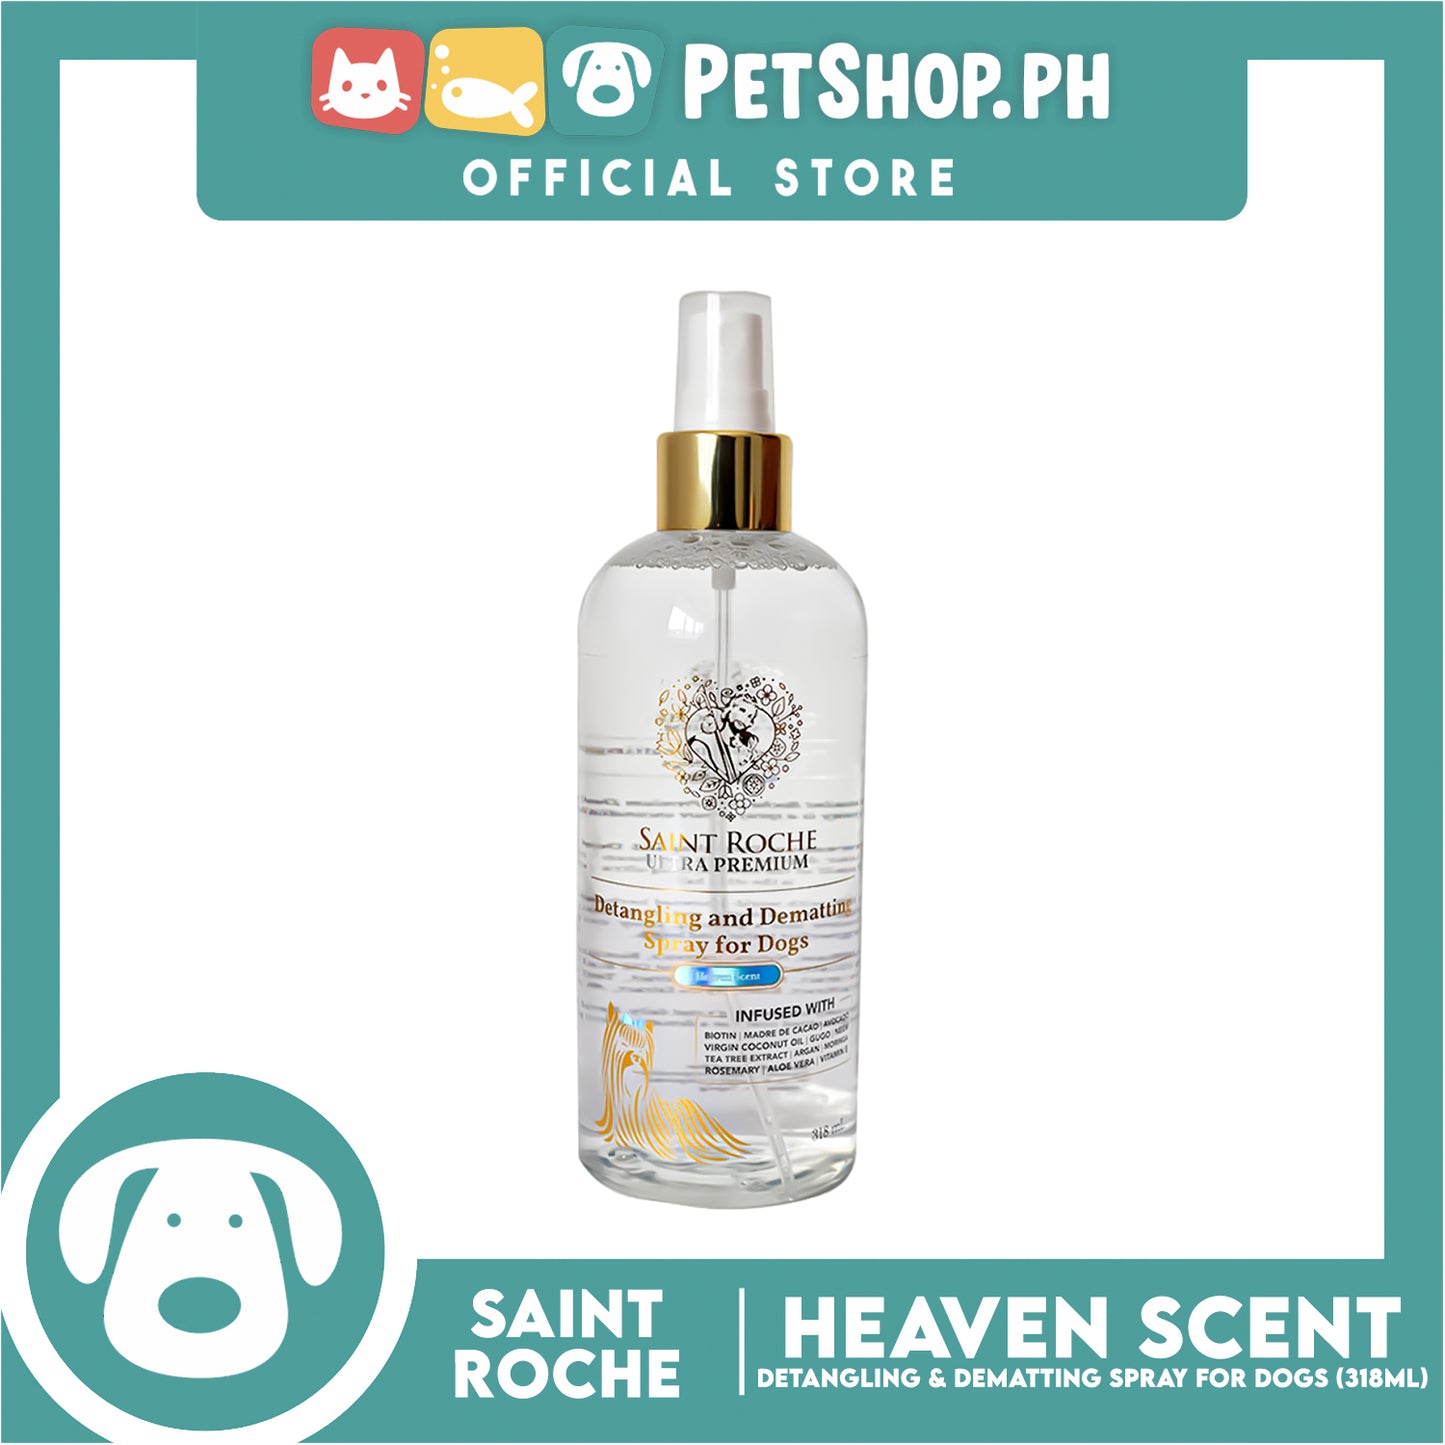 Saint Roche Ultra Premium Detangling and Dematting Spray for Dogs 318ml (Heaven Scent) Dogs Fur and Coat